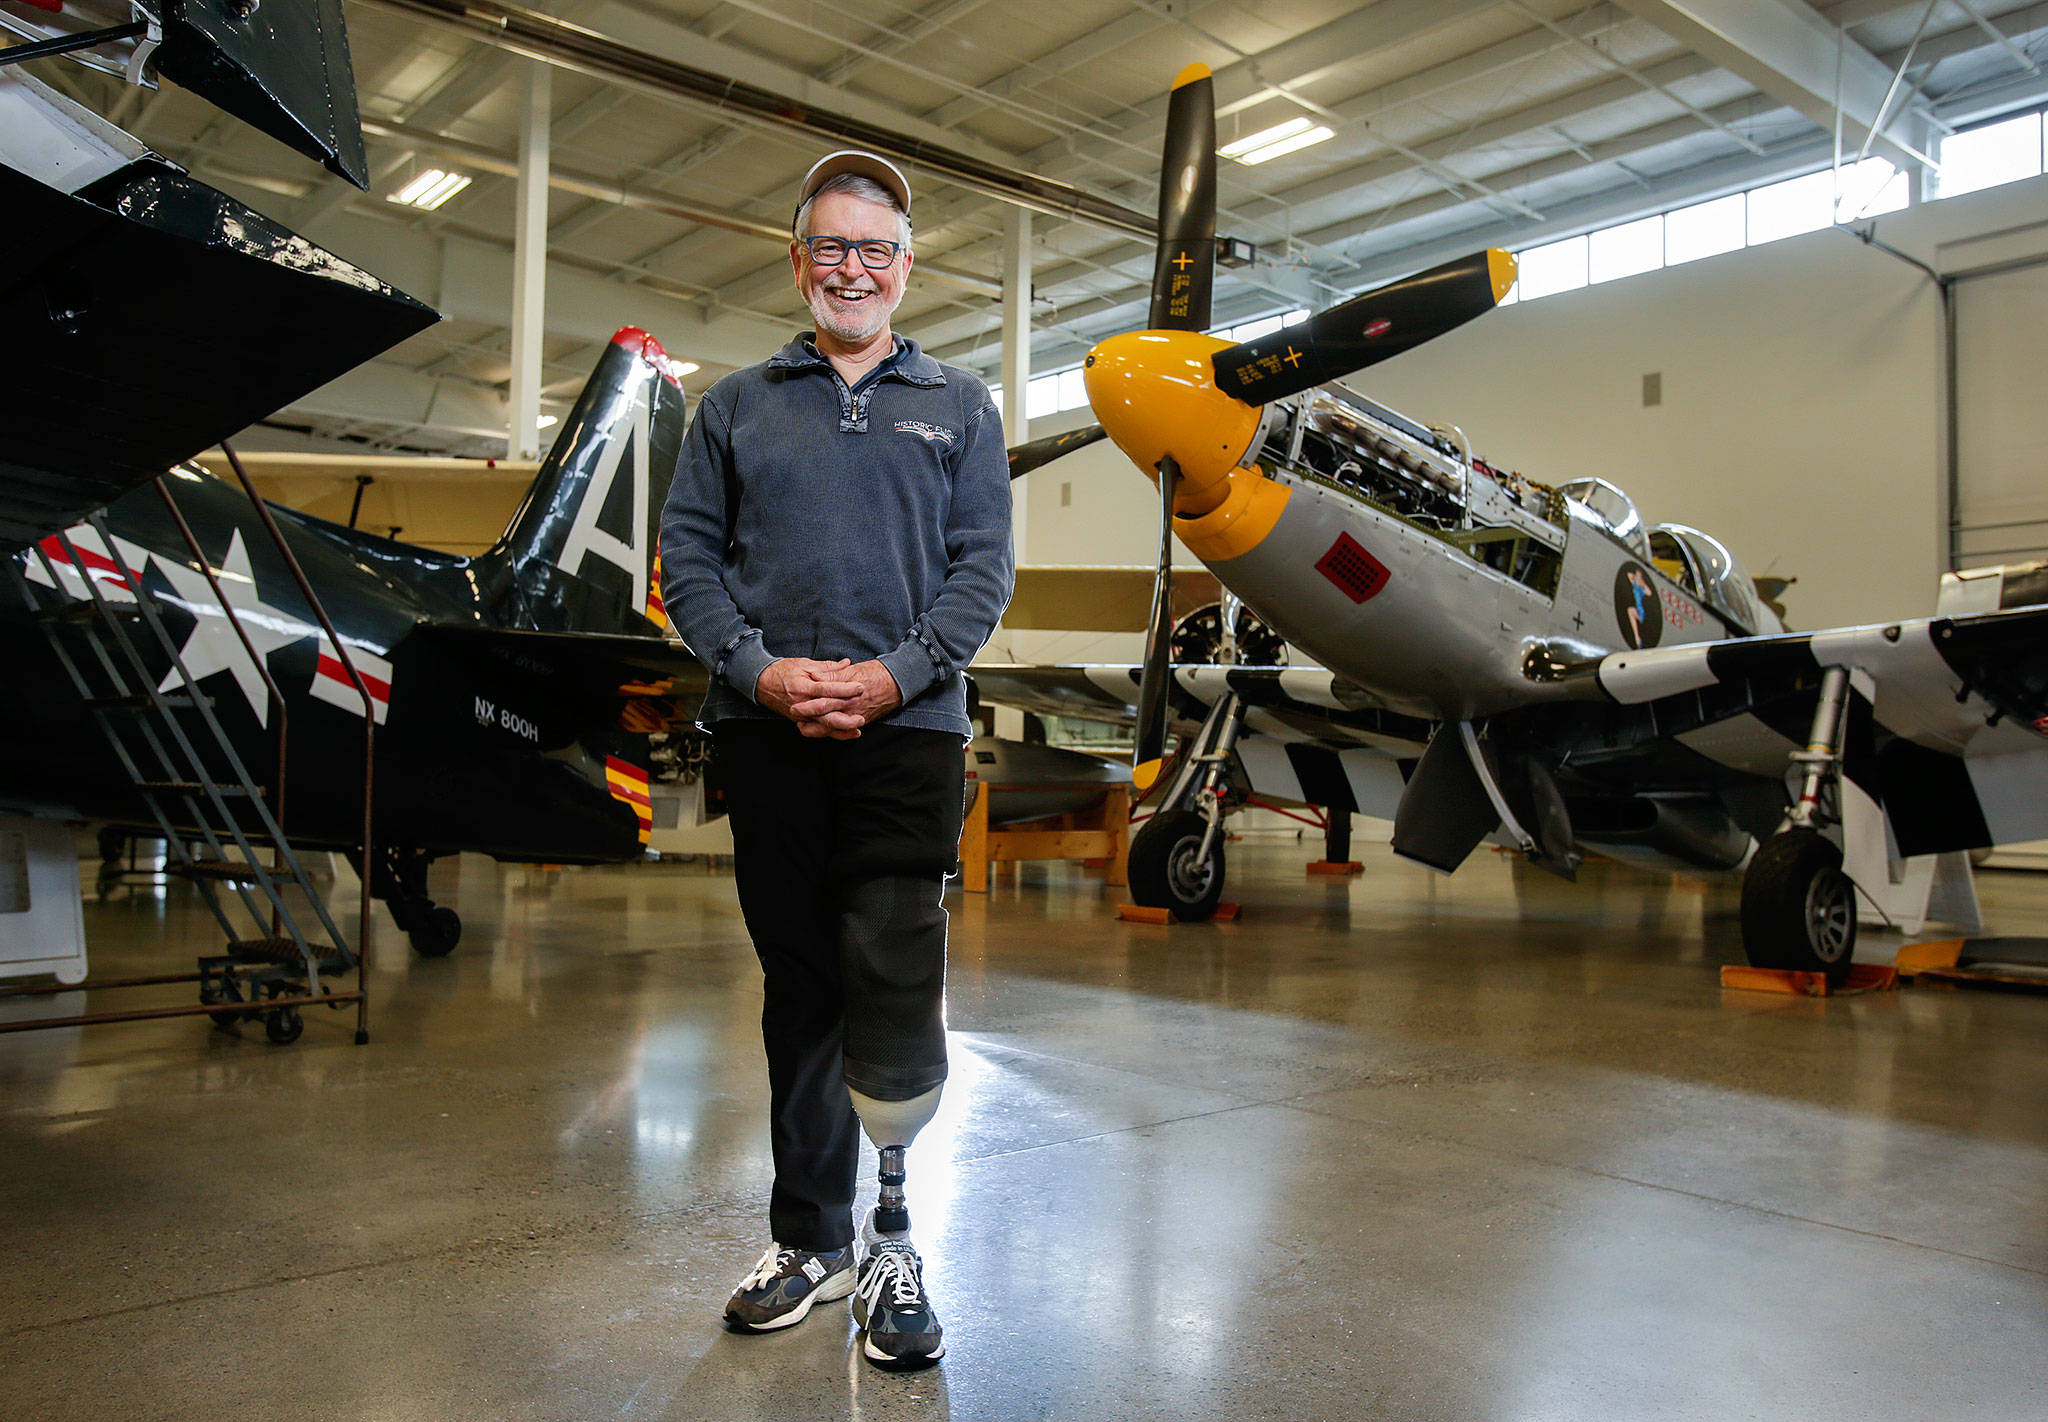 Wearing a prosthetic, Historic Flight Foundation president John Sessions talked in December 2018 about the airplane crash that cost him his left foot, when he was piloting a 1930s-vintage biplane during an airshow in British Columbia last summer. (Andy Bronson / Herald file)